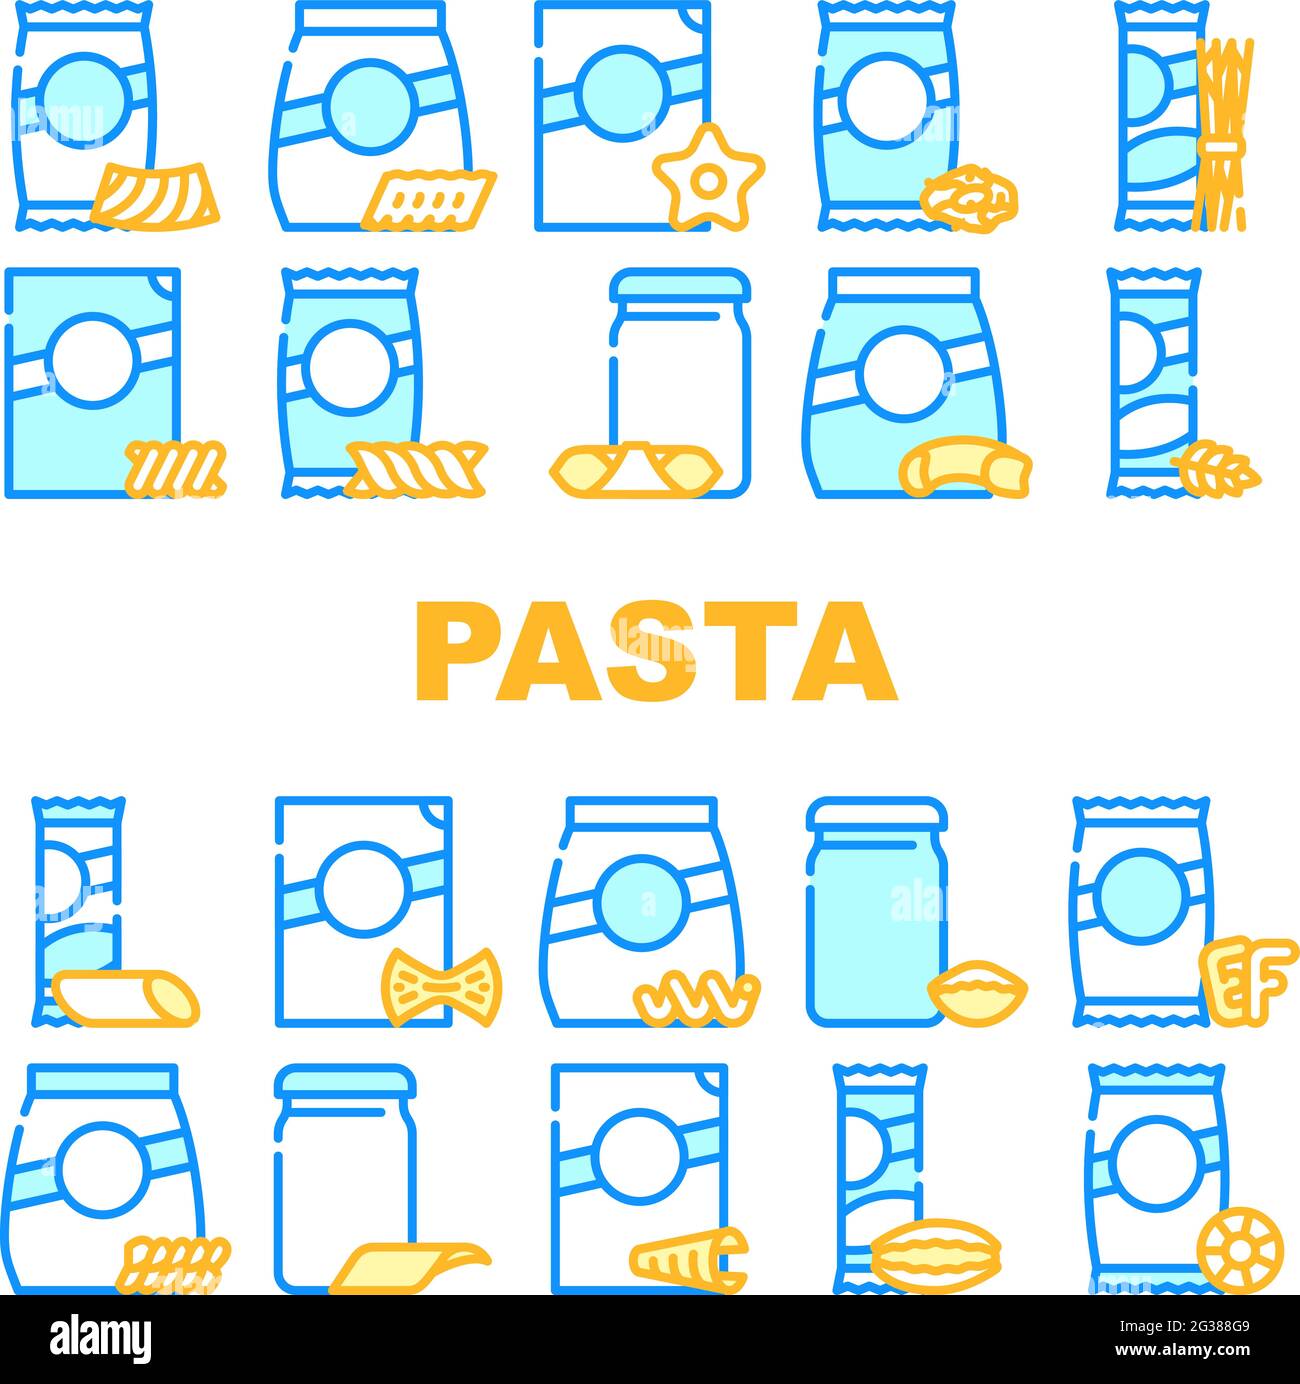 Pasta Food Package Collection Icons Set Vector Stock Vector